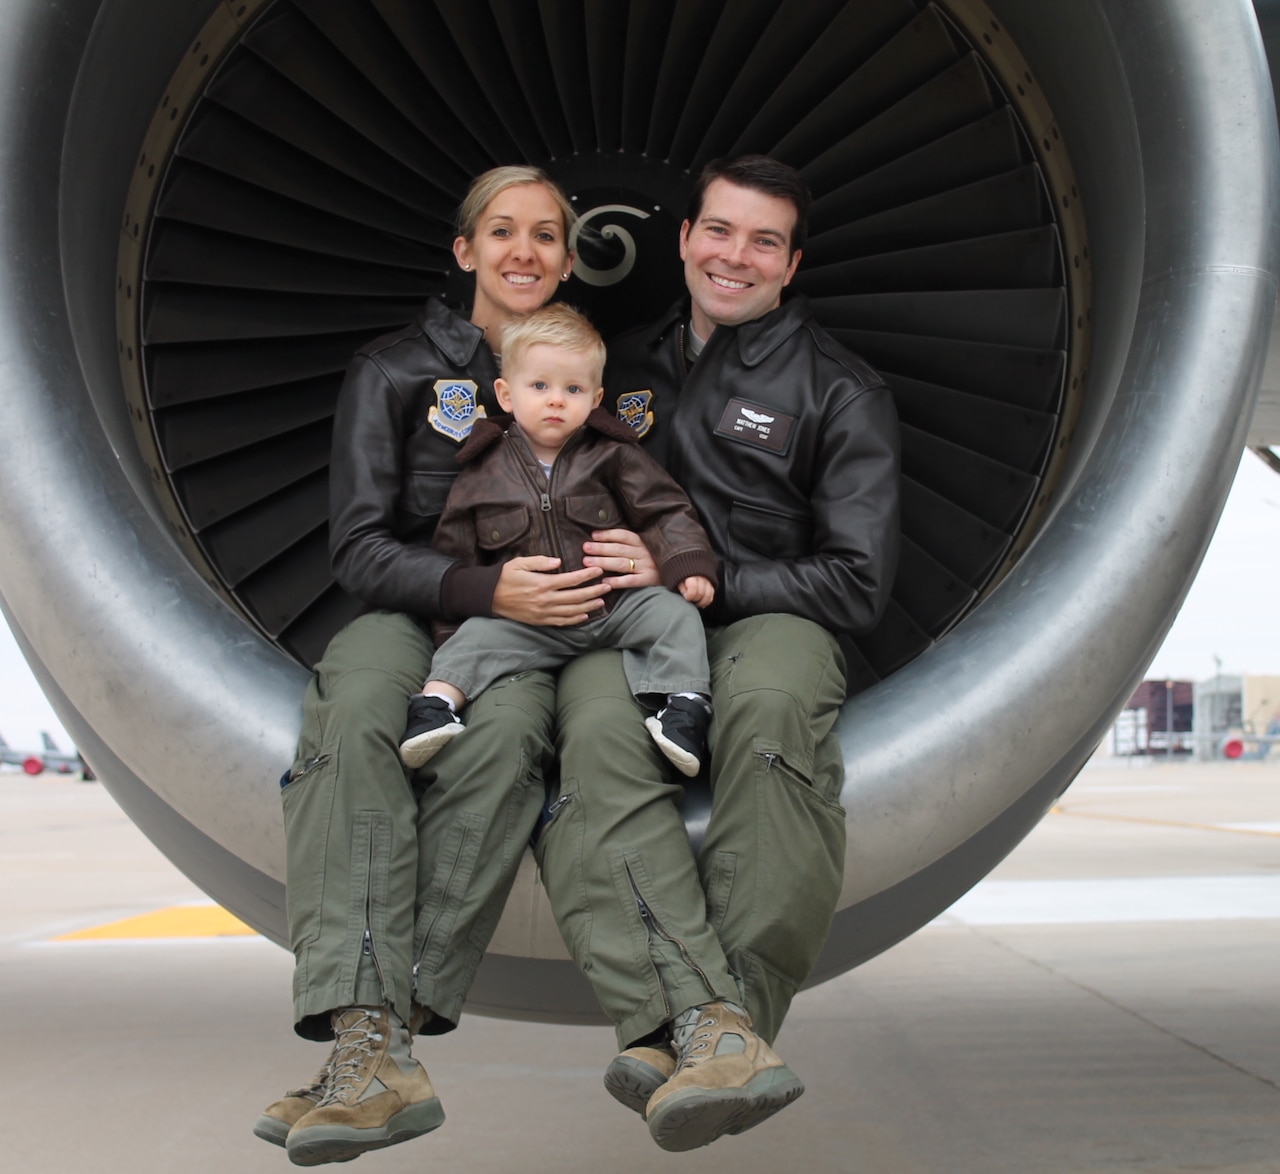 Capt. Chrystina Jones, left, 350th Air Refueling Squadron pilot, and Maj. Matt Jones, 349th ARS pilot, pose with their son, Dec. 2015, at McConnell Air Force Base, Kan. They both “refuel the fight” as KC-135 Stratotanker pilots, an aircraft that first took flight for the first time 60 years ago. (Courtesy photo)